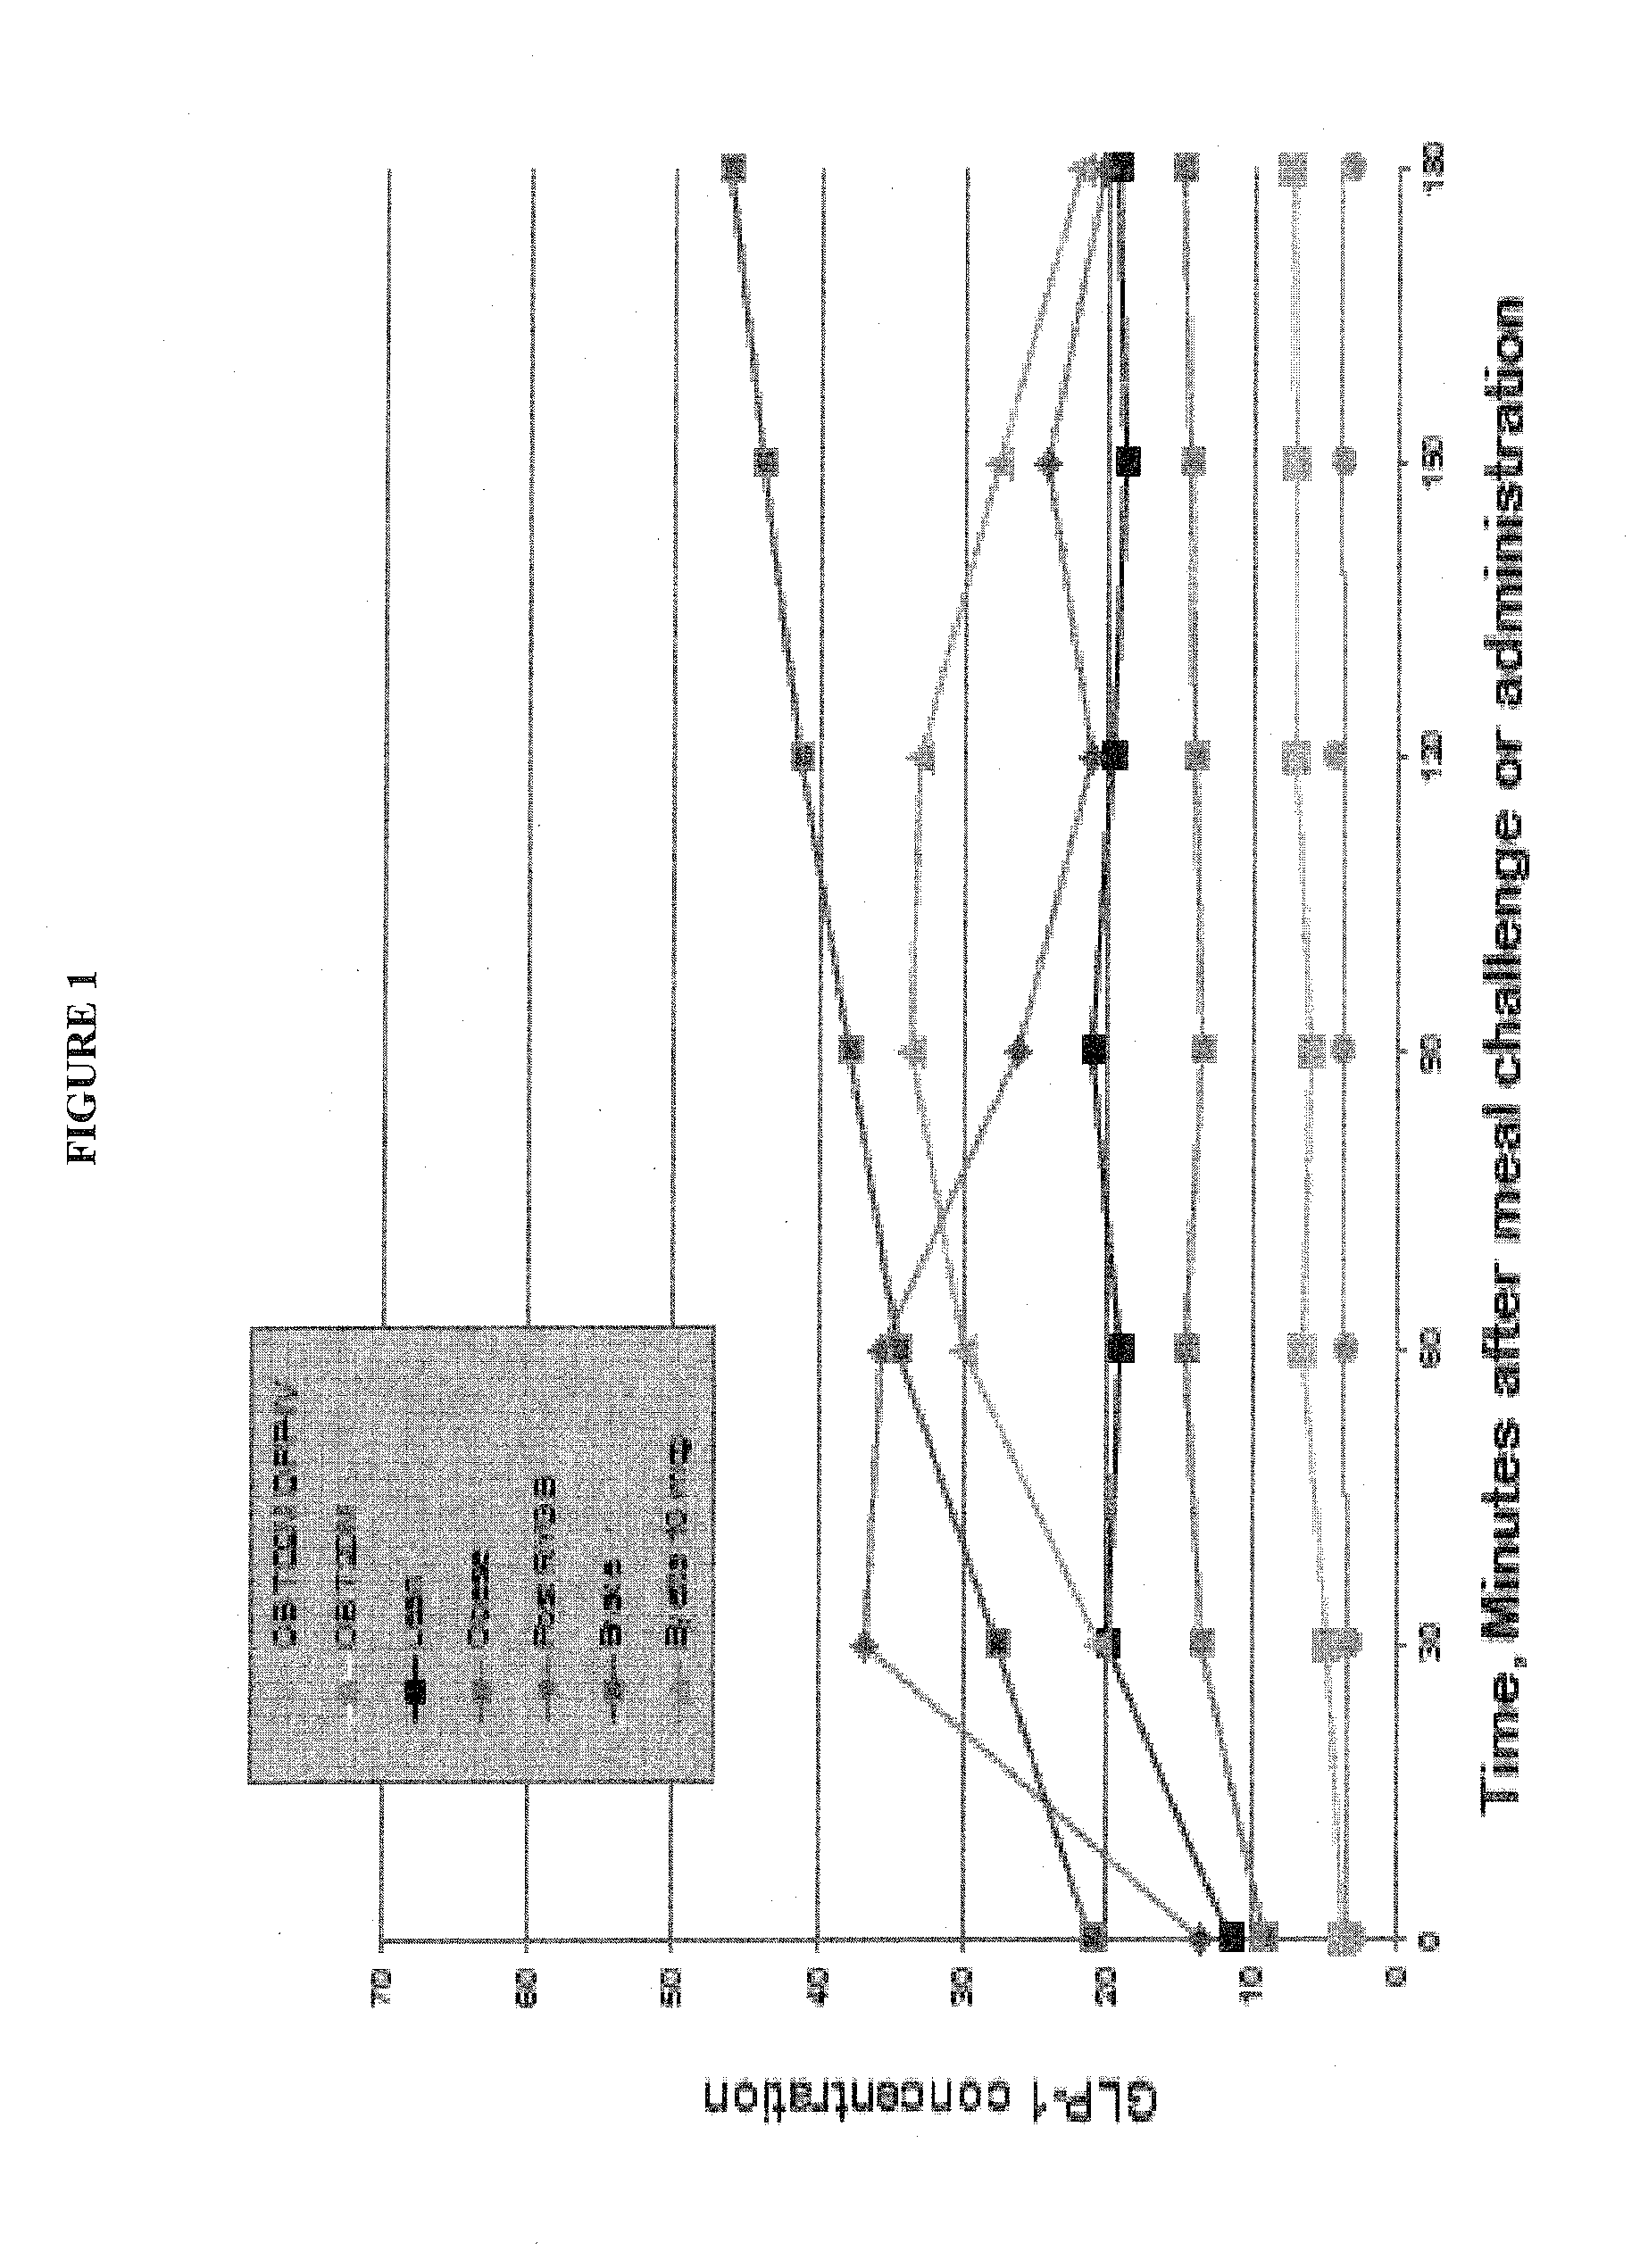 Activation of the endogenous ileal brake hormone pathway for organ regeneration and related compositions, methods of treatment, diagnostics, and regulatory systems